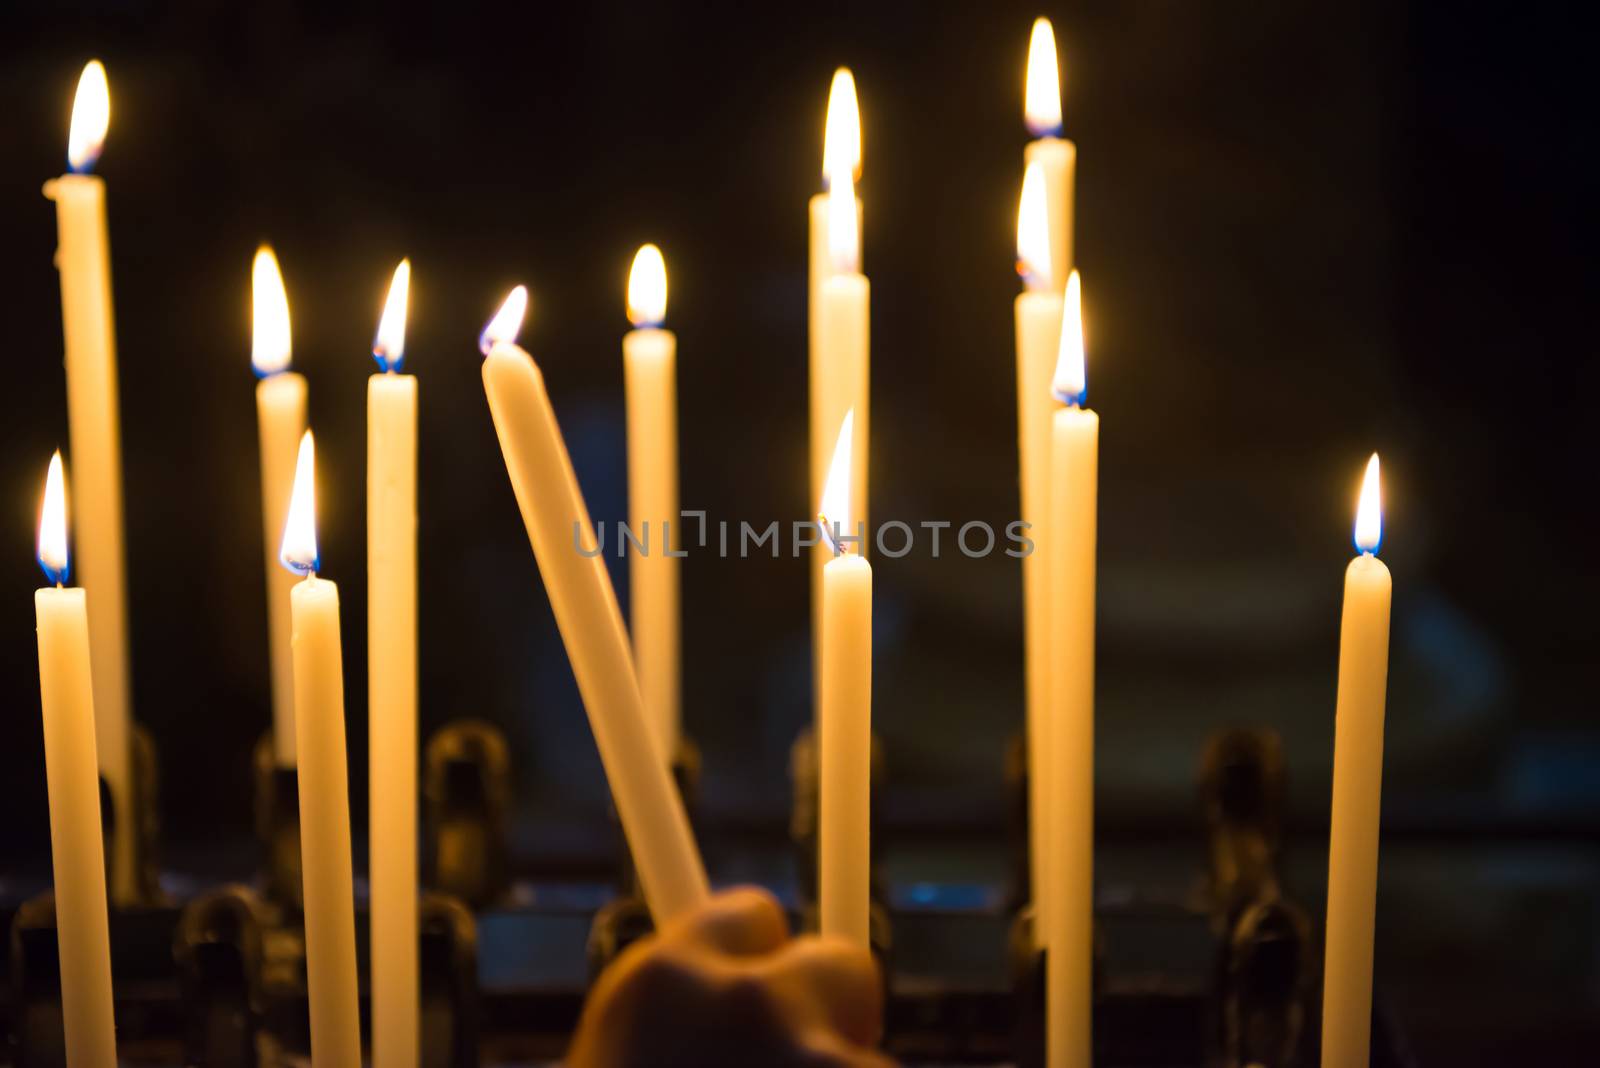 Hand lights candles in the church on the black background